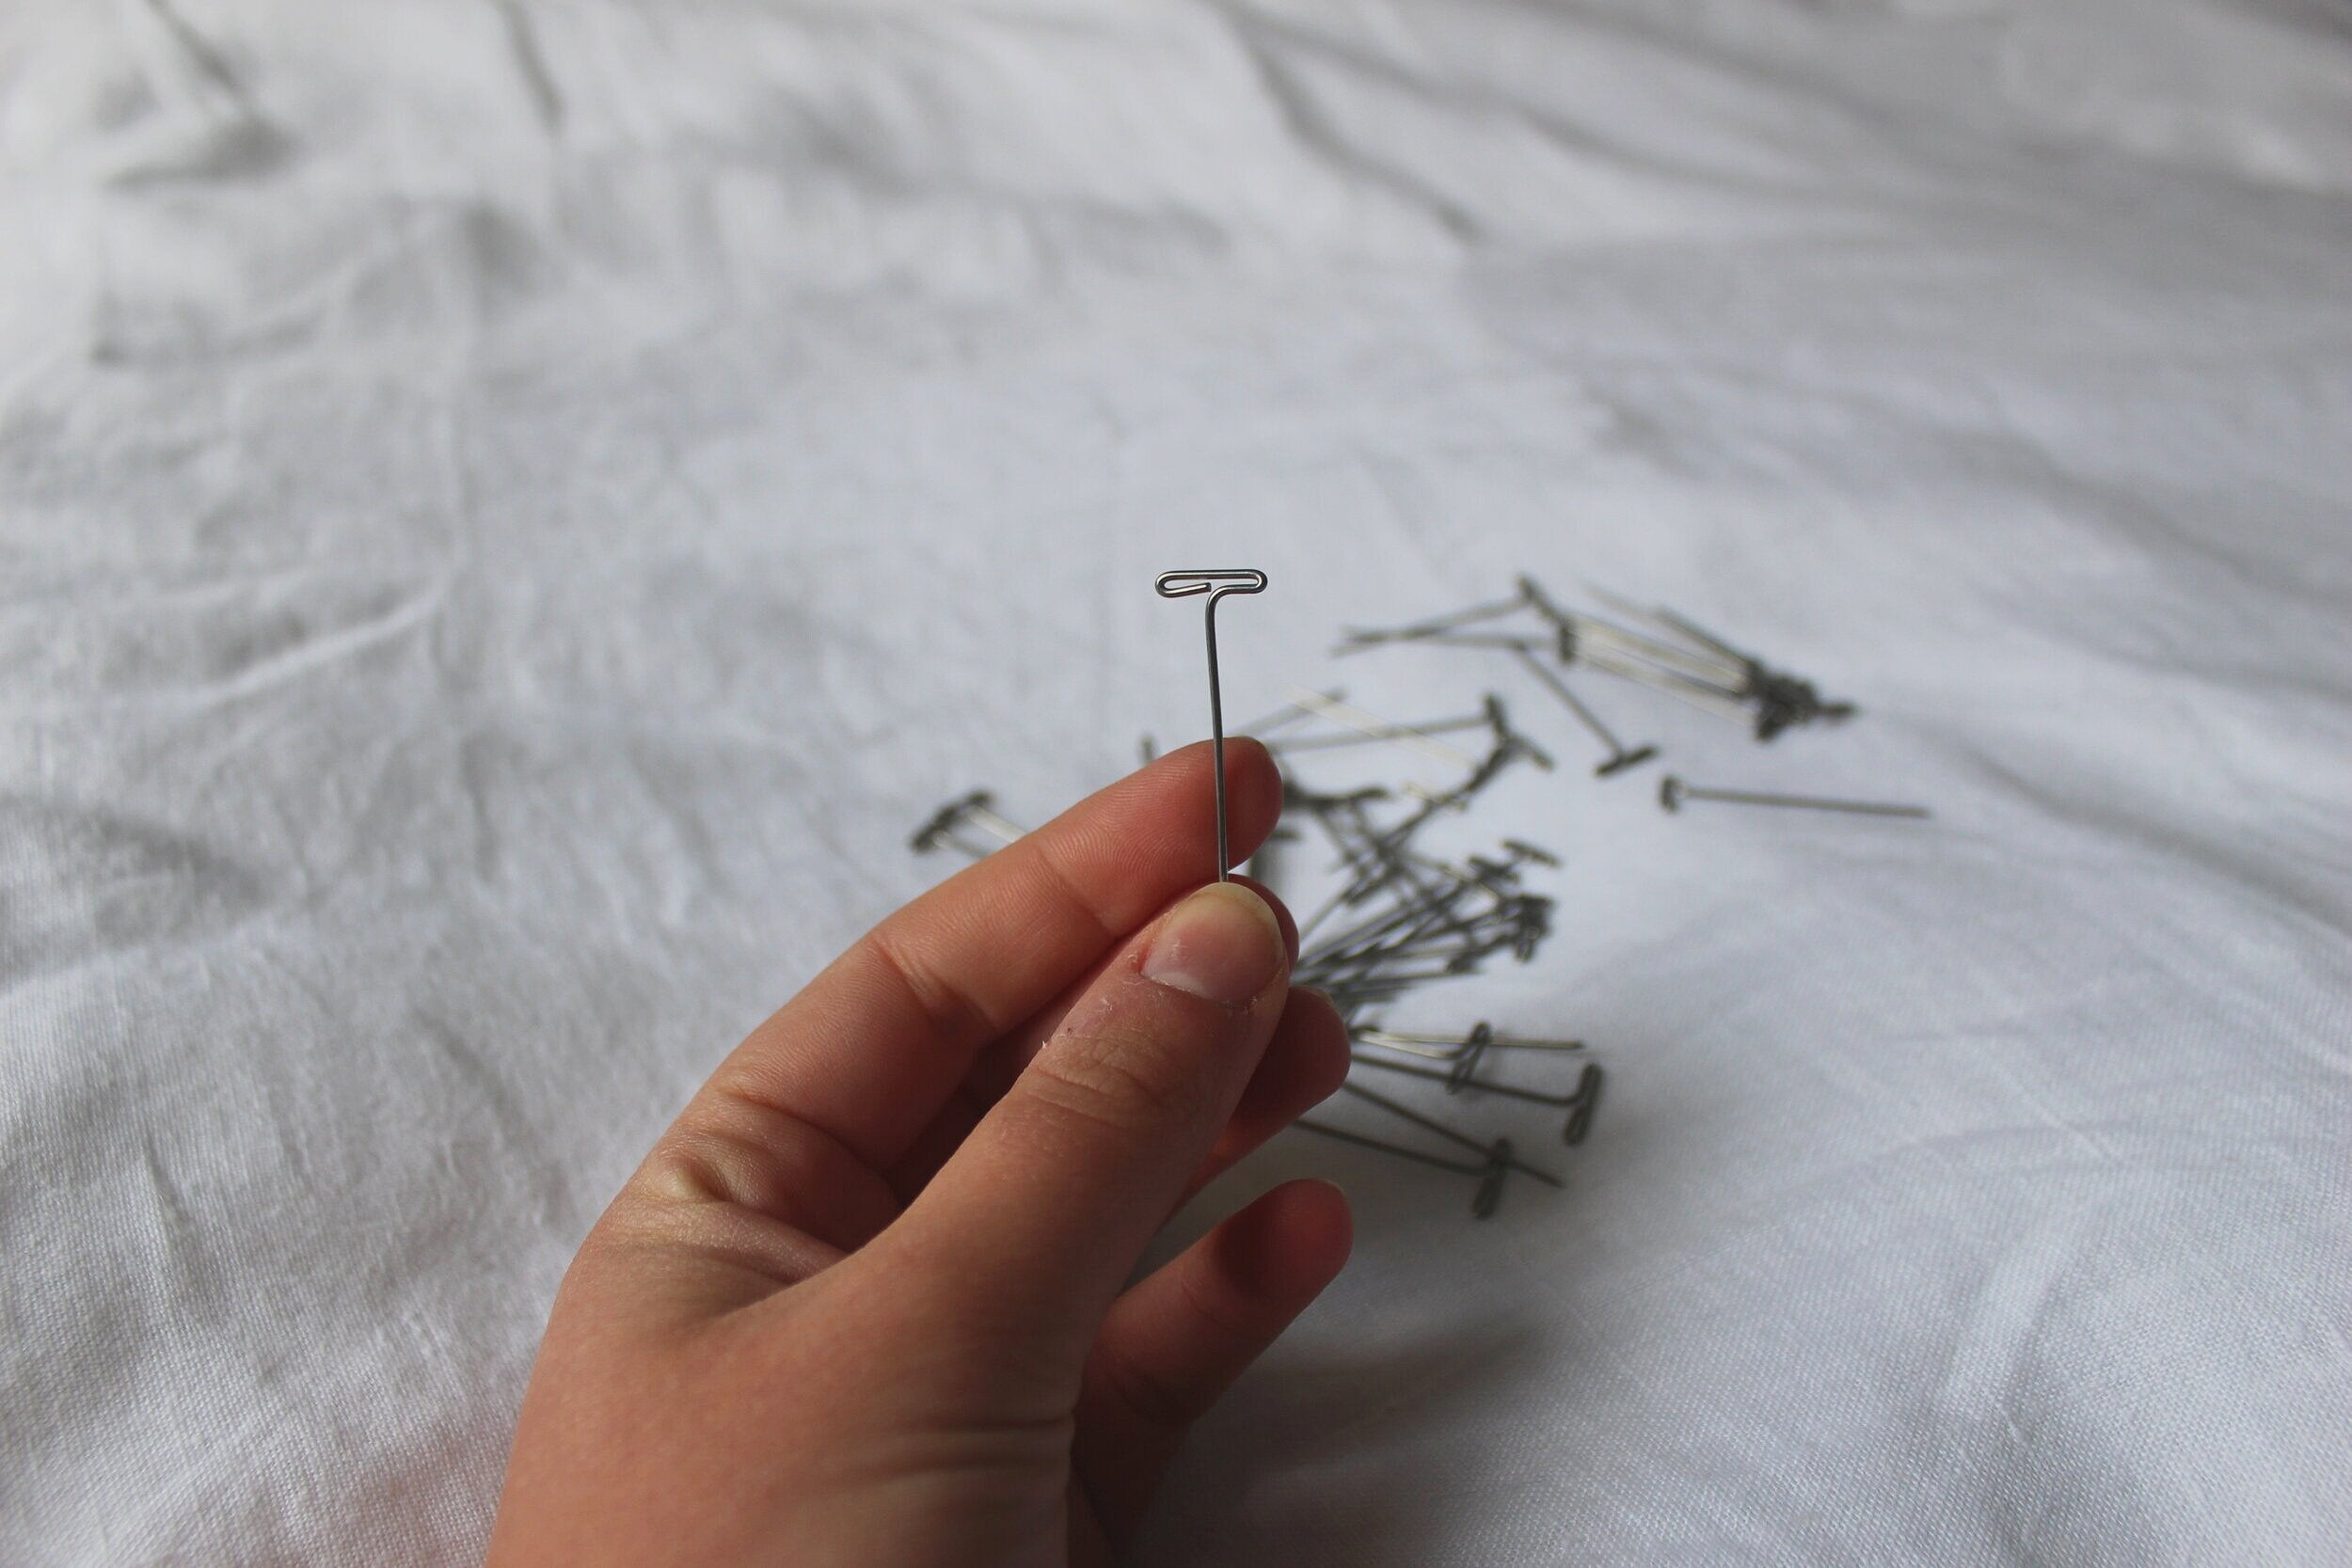 KnitIQ Strong Stainless Steel T-Pins for Blocking Knitting, Crochet &  Sewing Projects | 150 Units, 1.5 Inch Pin Needles | Comes with Hinged  Reusable